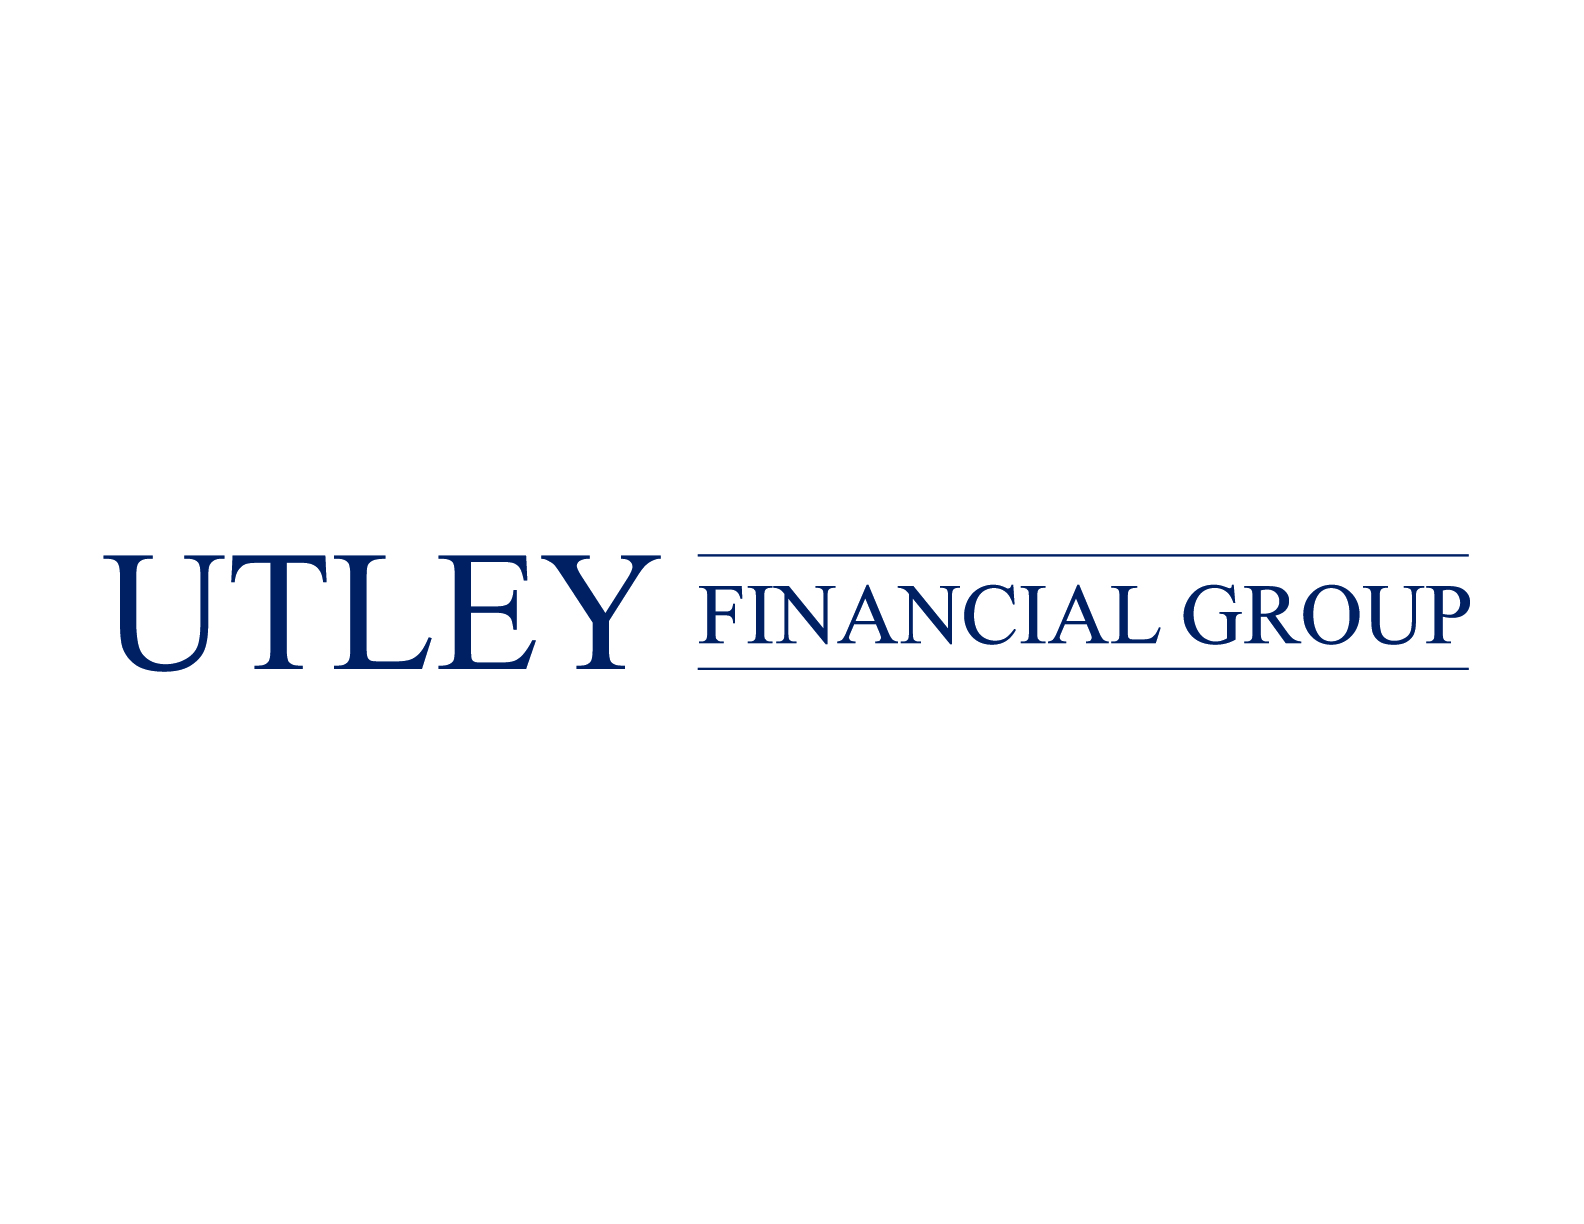 Utley Financial Group